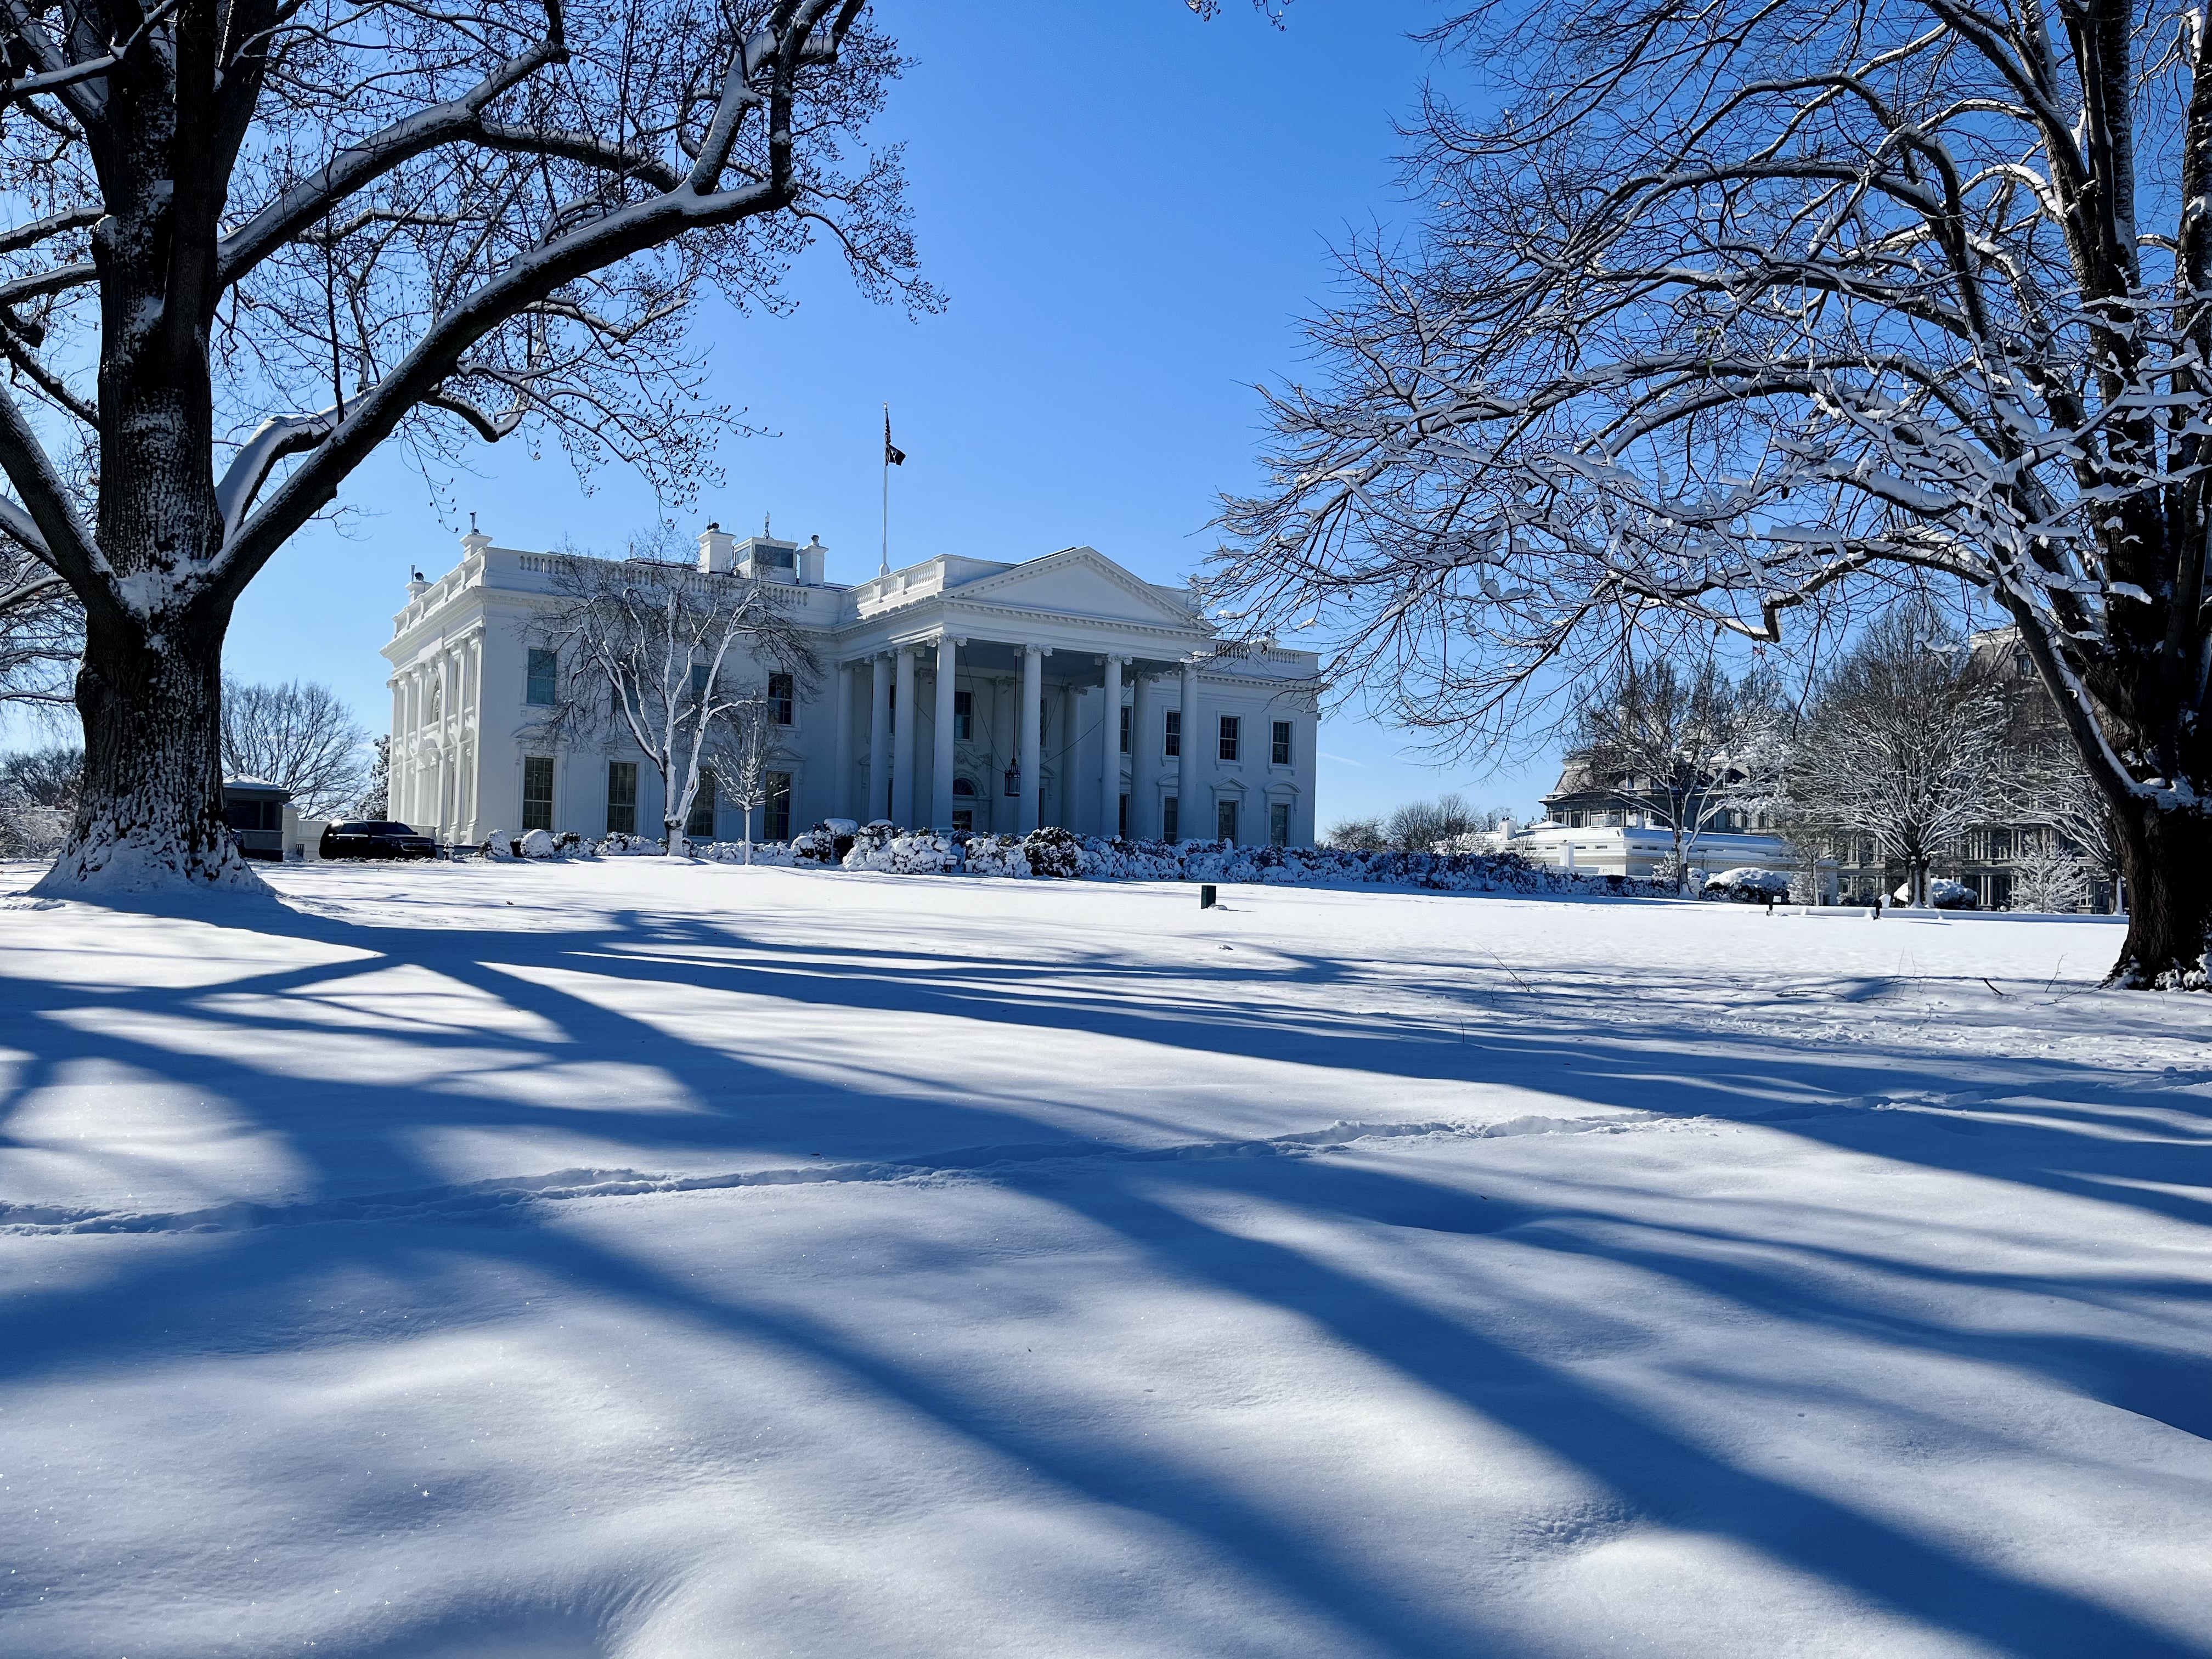 White House in the snow by Joe Flood